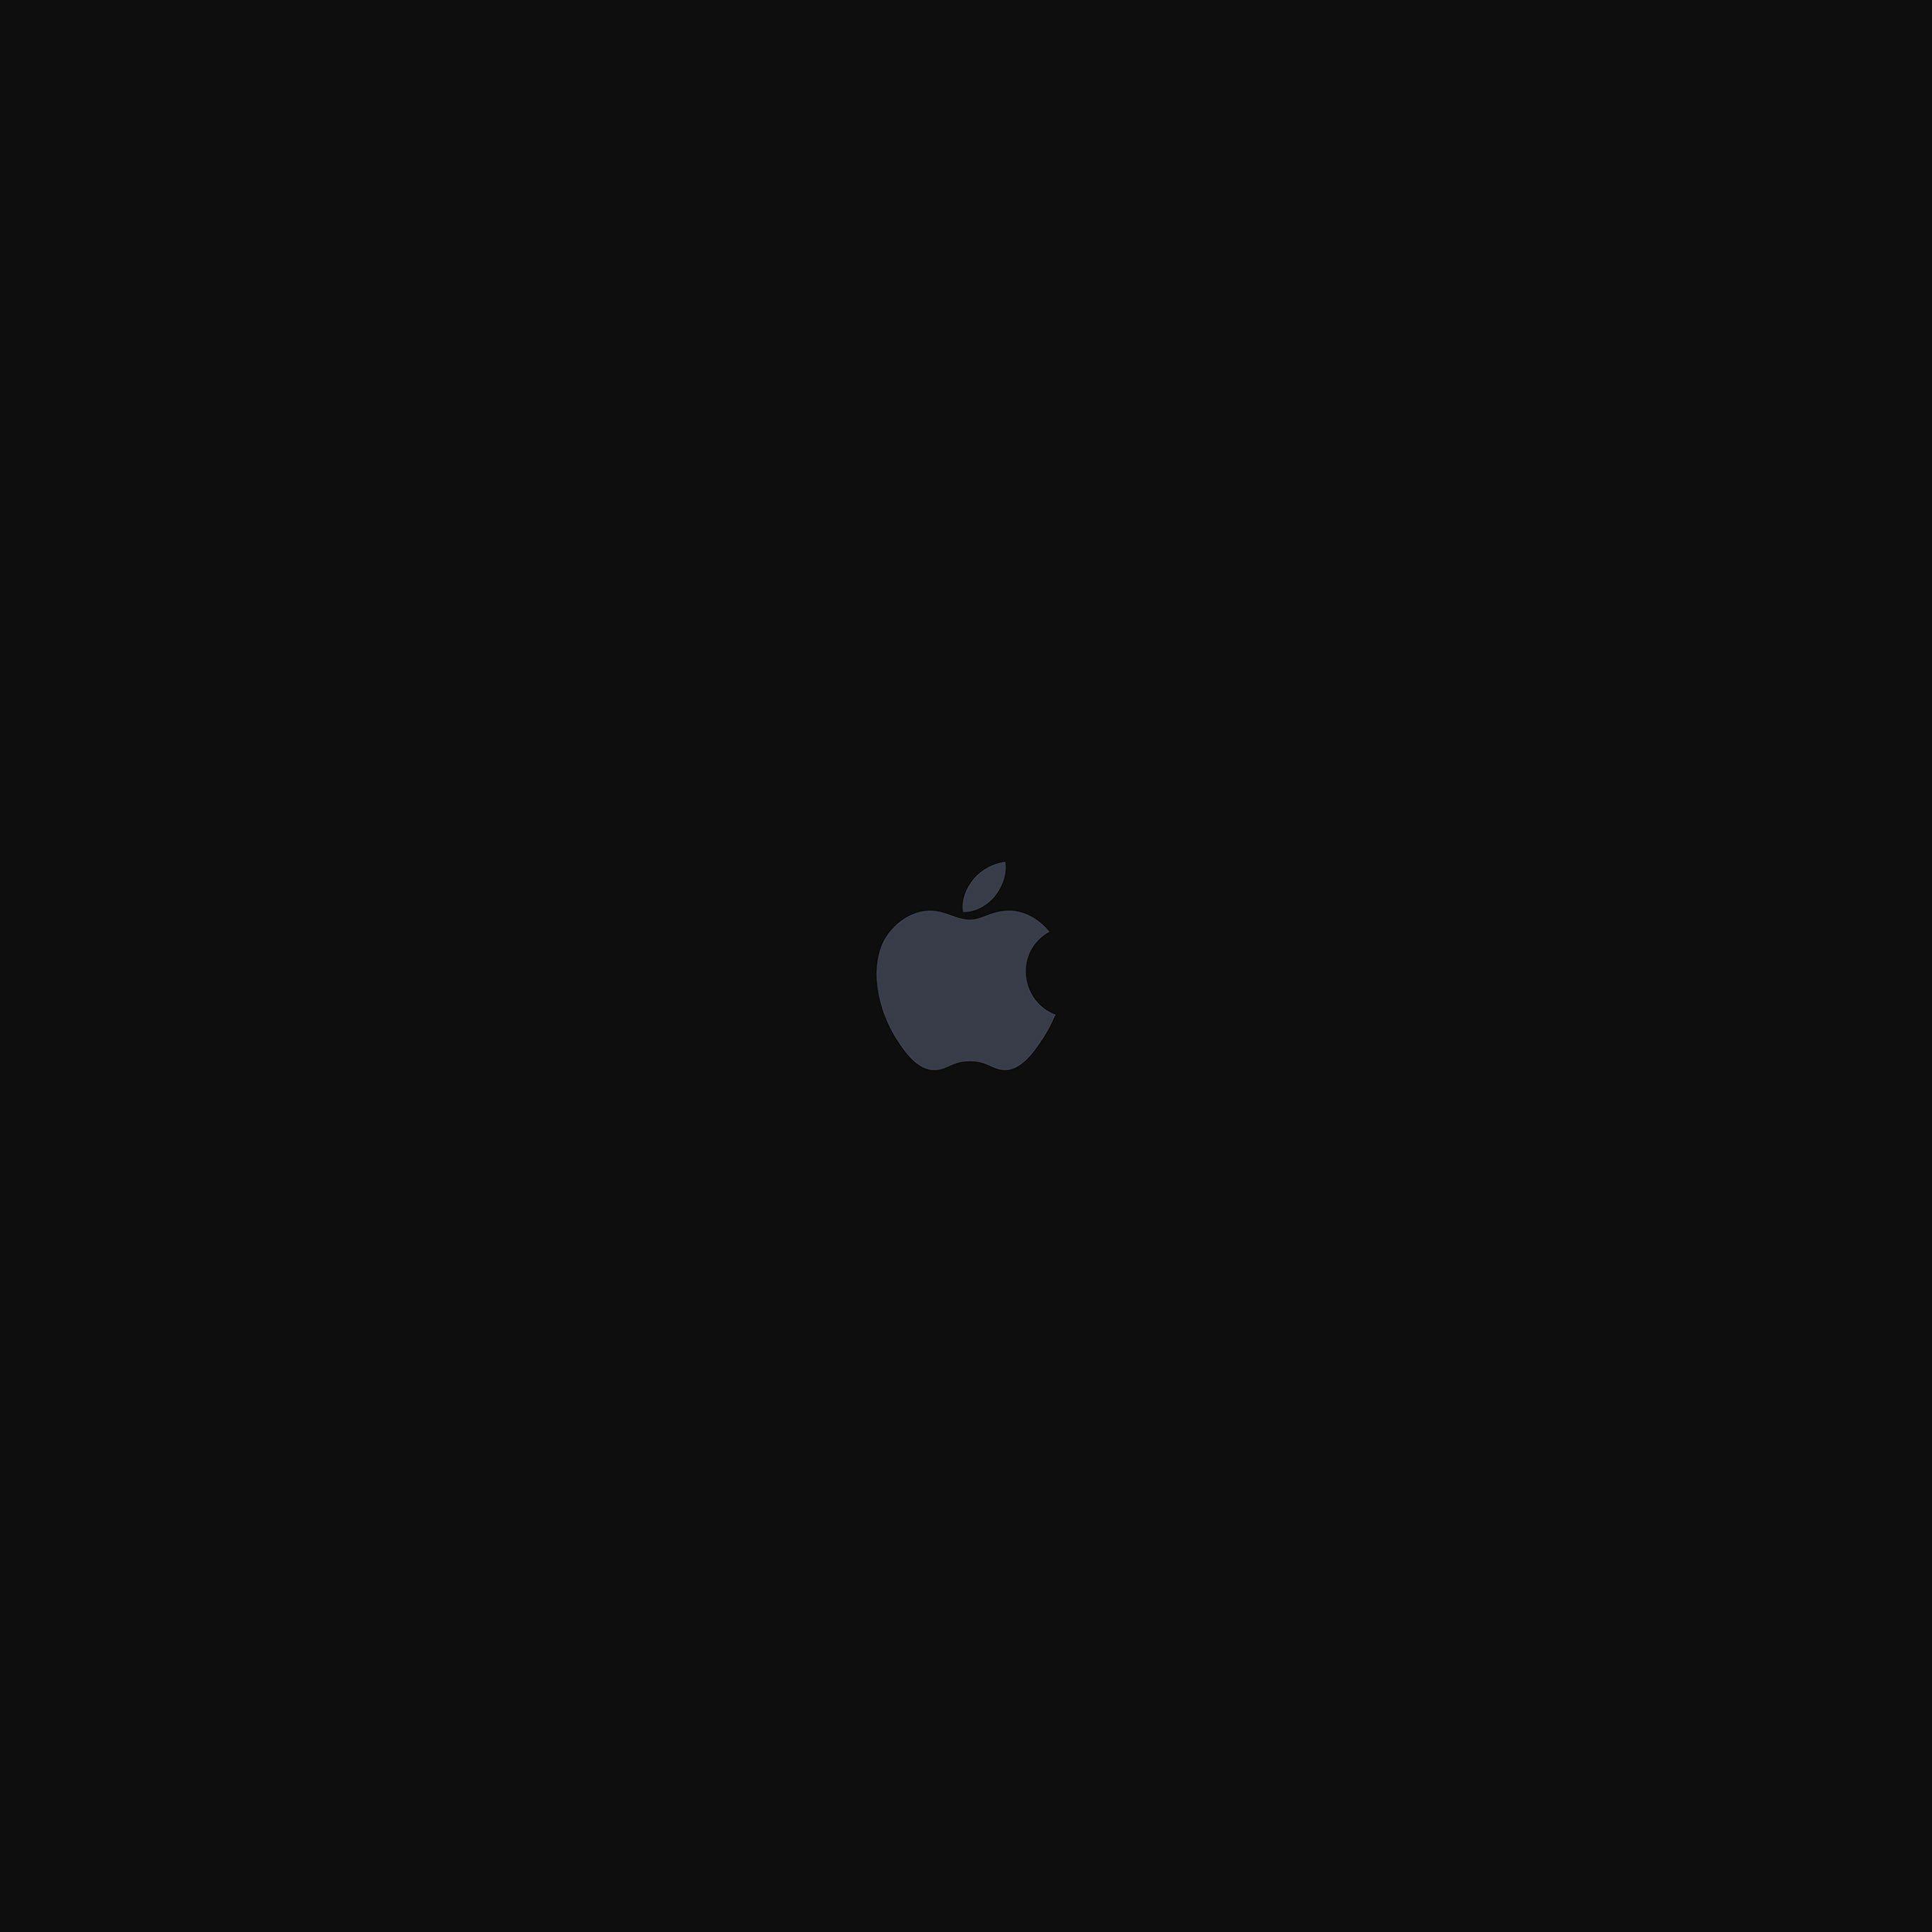 Small Apple Logo Wallpapers Top Free Small Apple Logo